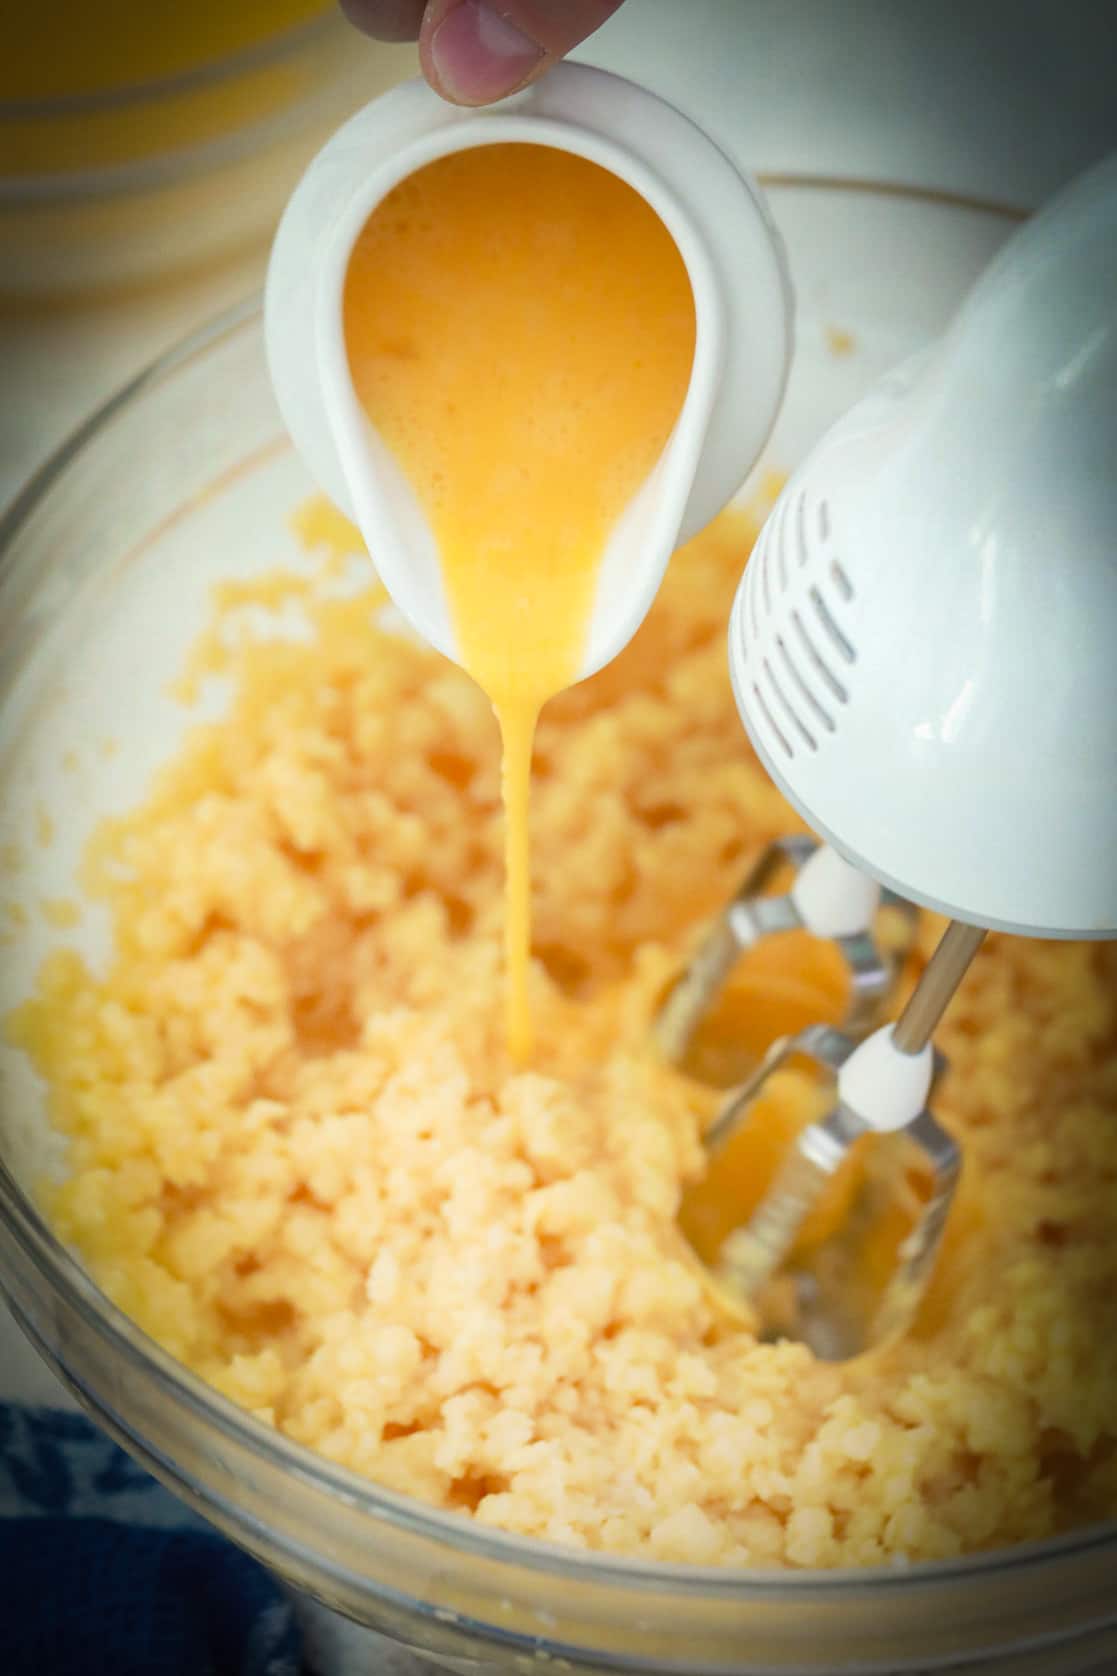 Pouring beaten eggs into choux pastry dough while using an electric mixer to beat the dough.